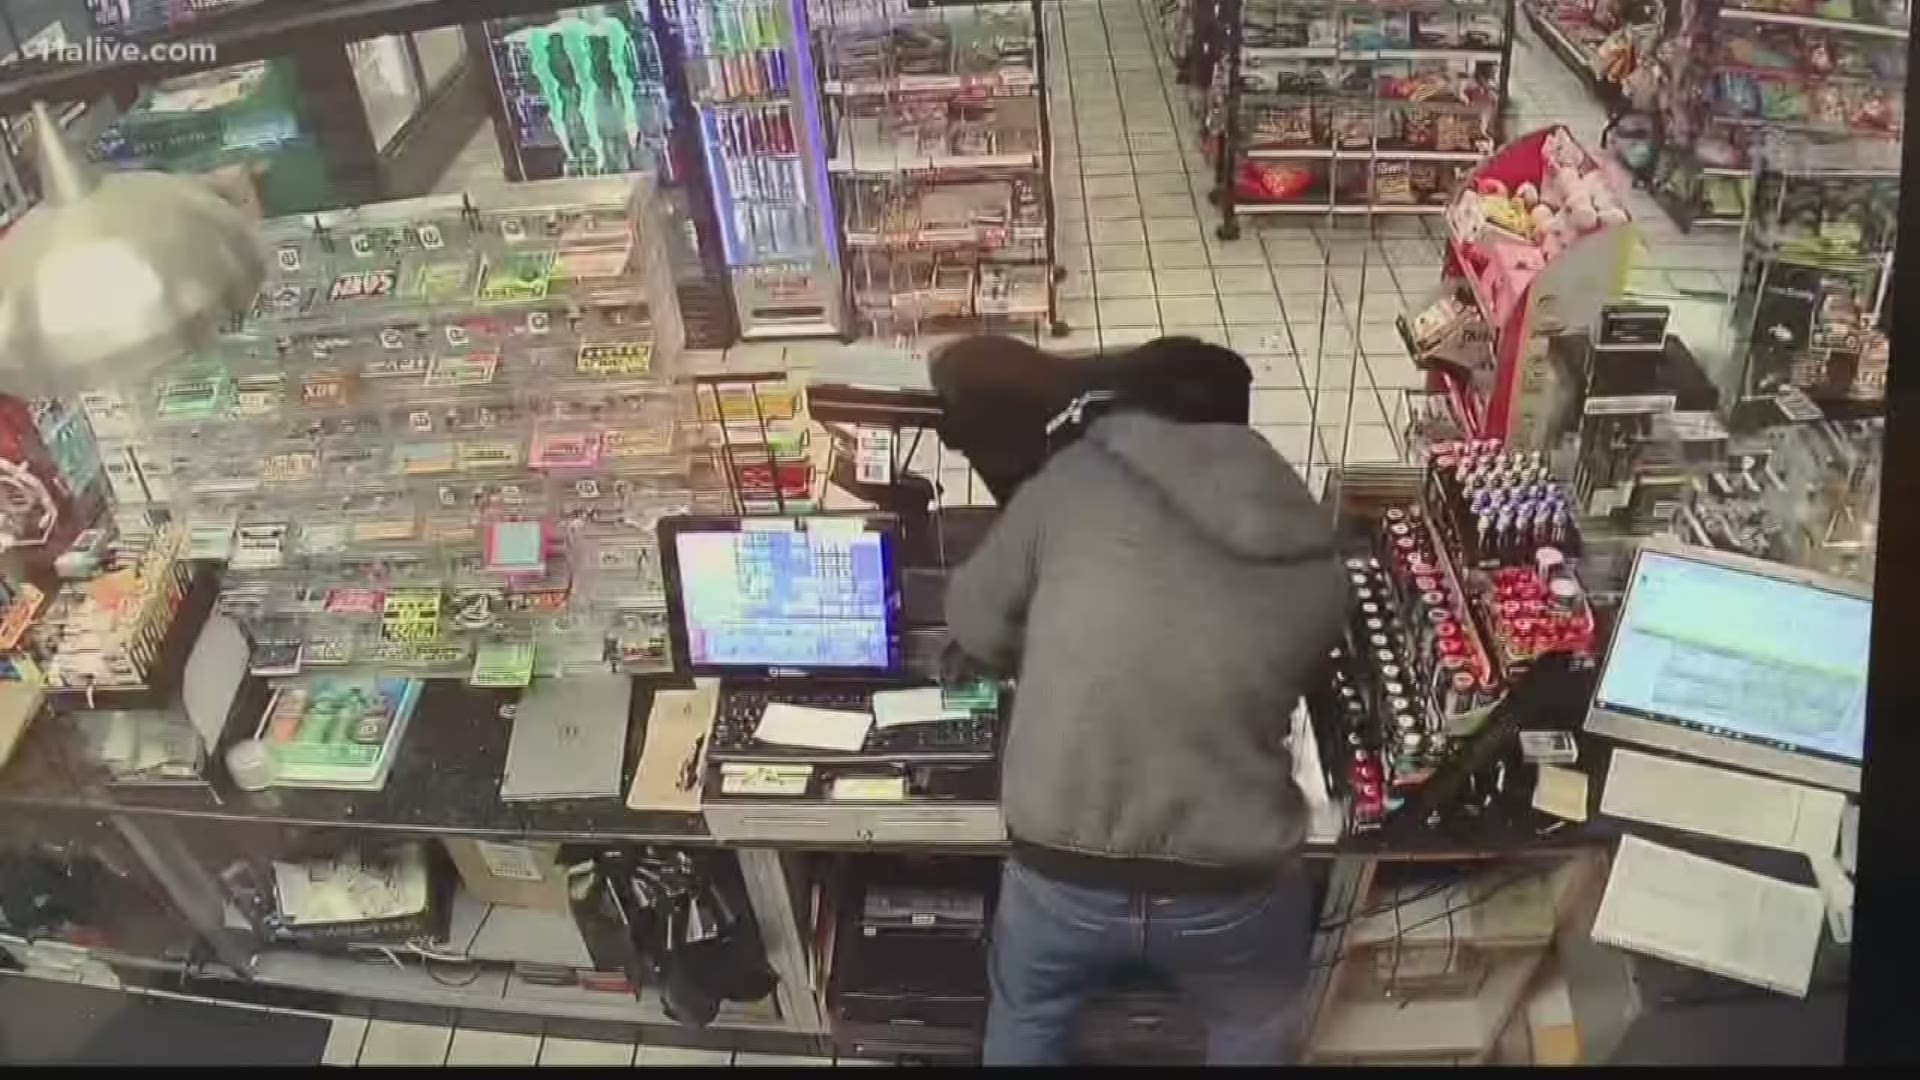 Police said the clerk helped stop a crime spree.